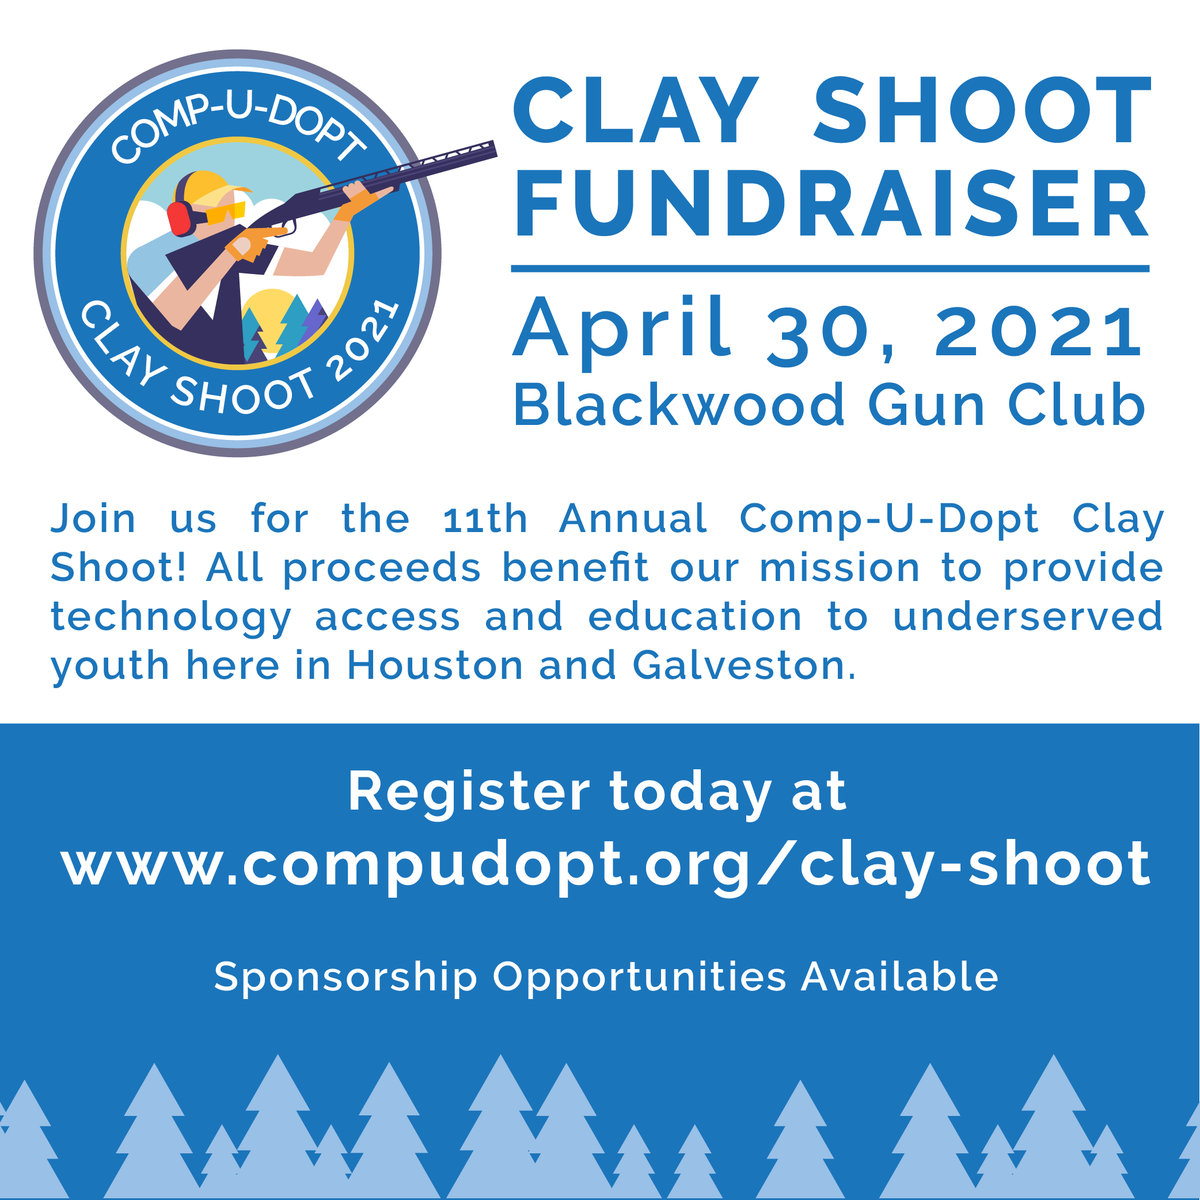 Don't miss your chance to join us for the 11th Annual @Comp_U_Dopt Clay Shoot on April 30th, 2021. Register your team today at compudopt.org/clay-shoot